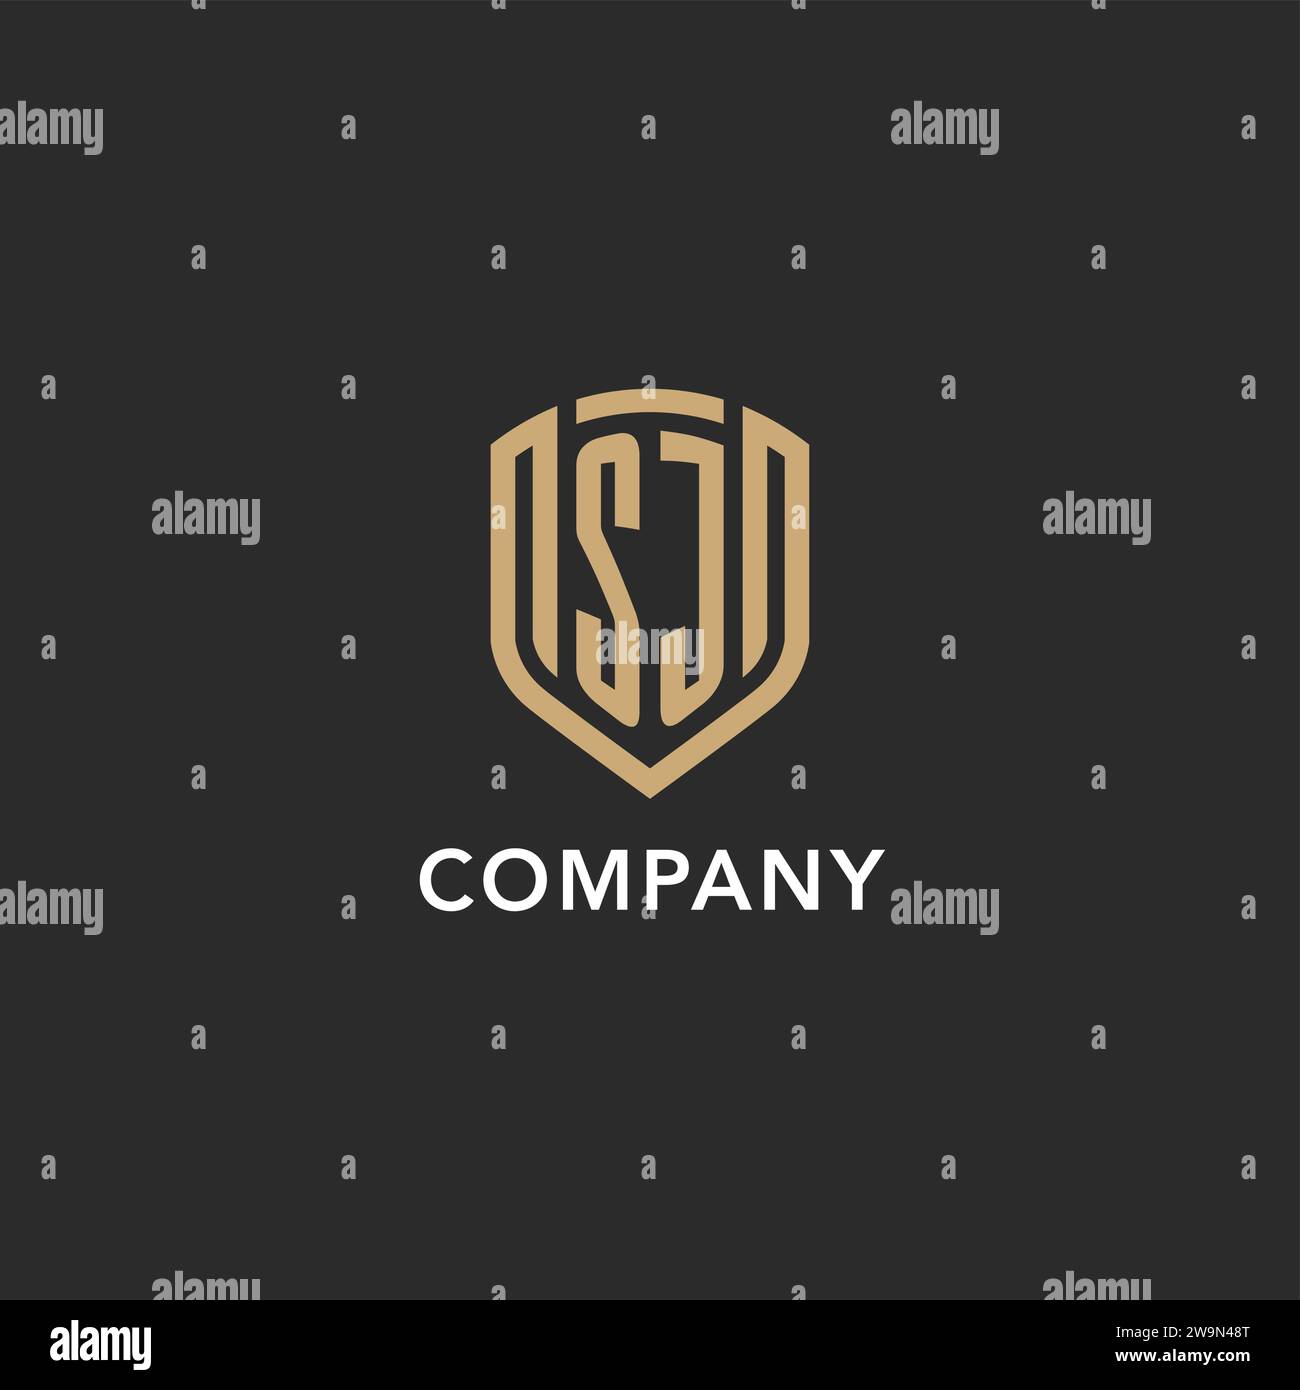 Luxury SJ logo monogram shield shape monoline style with gold color and dark background vector graphic Stock Vector